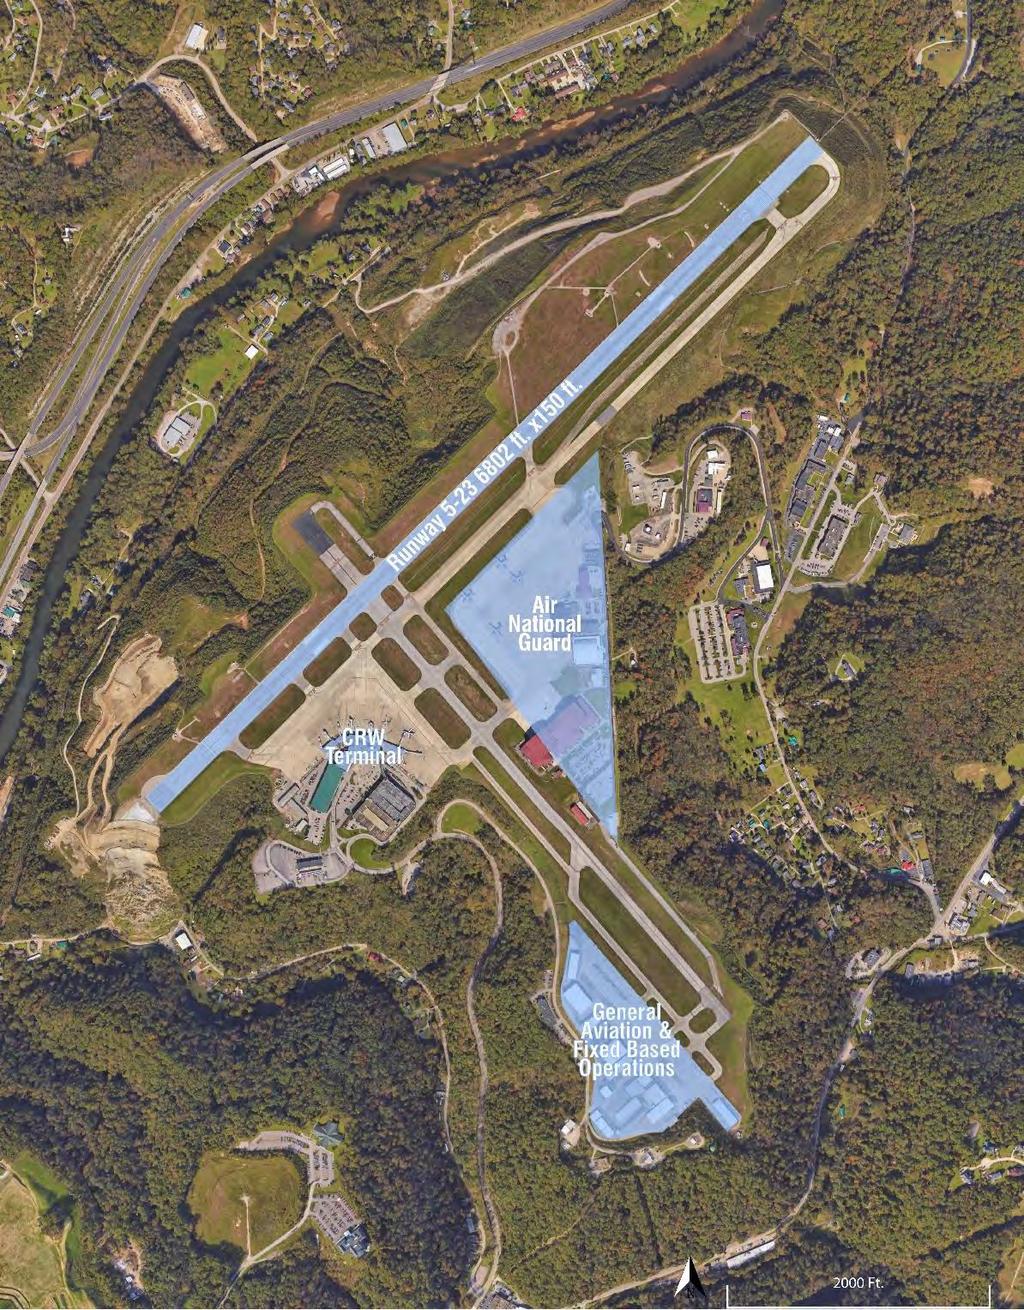 INTERIM RUNWAY SAFETY AREA STUDY Exhibit 3-1 EXISTING AIRPORT CONFIGURATION Yeager Airport